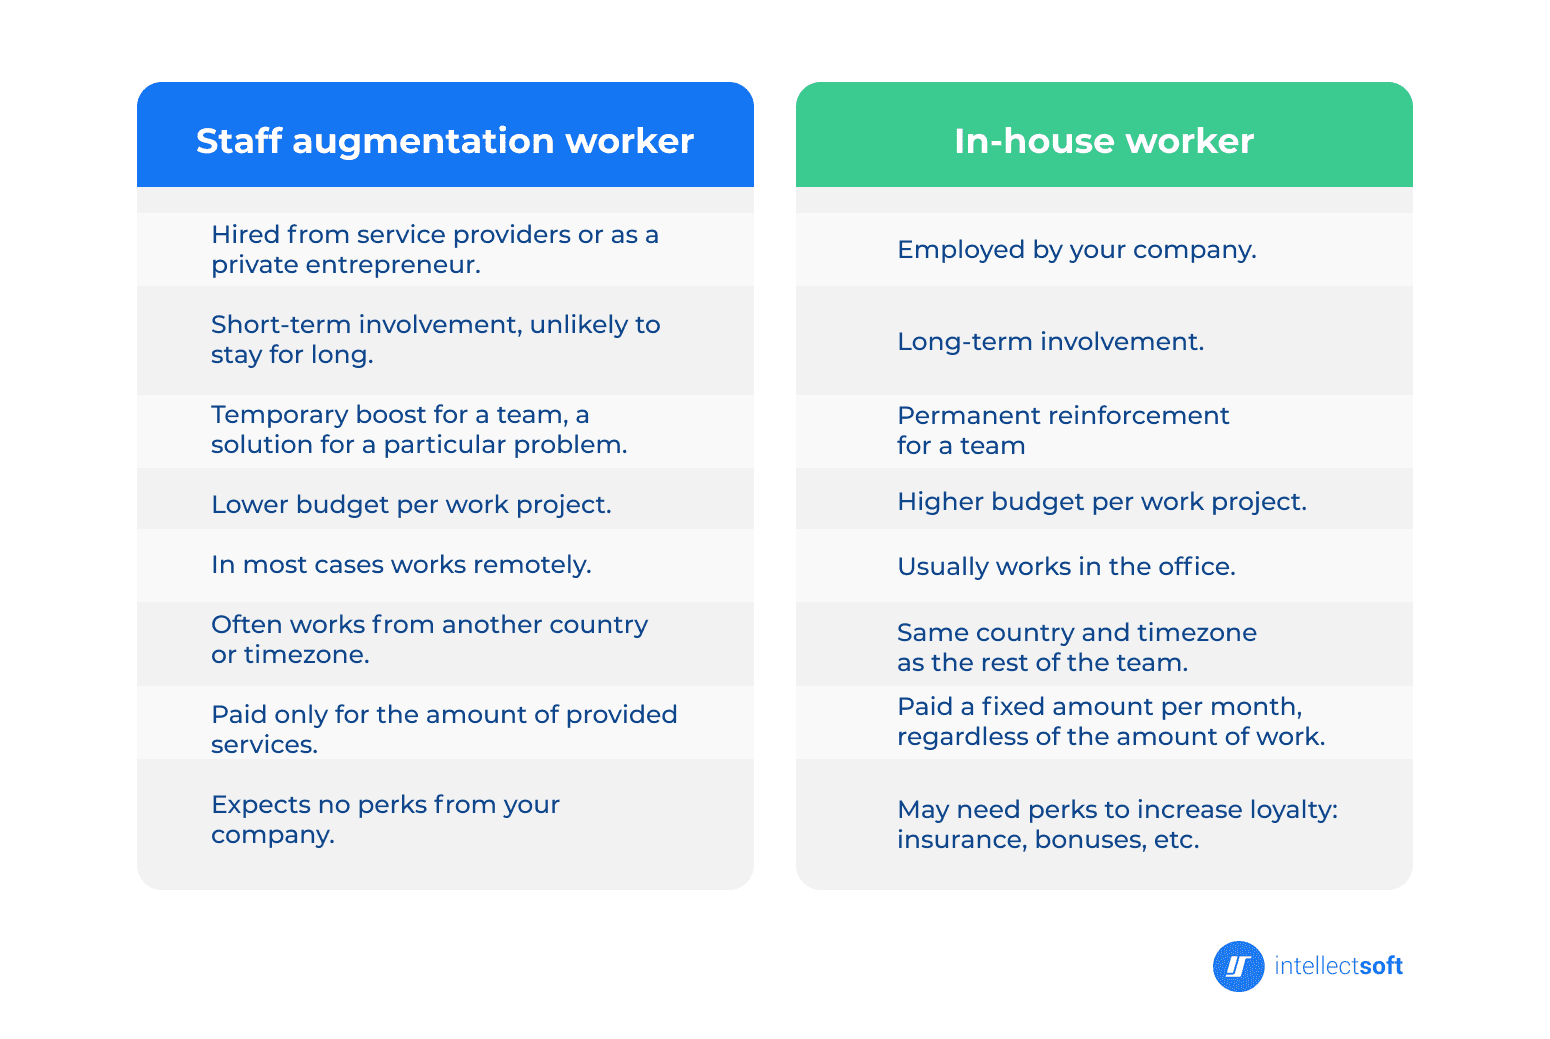 Staff augmentation worker and in-house worker, table of differences